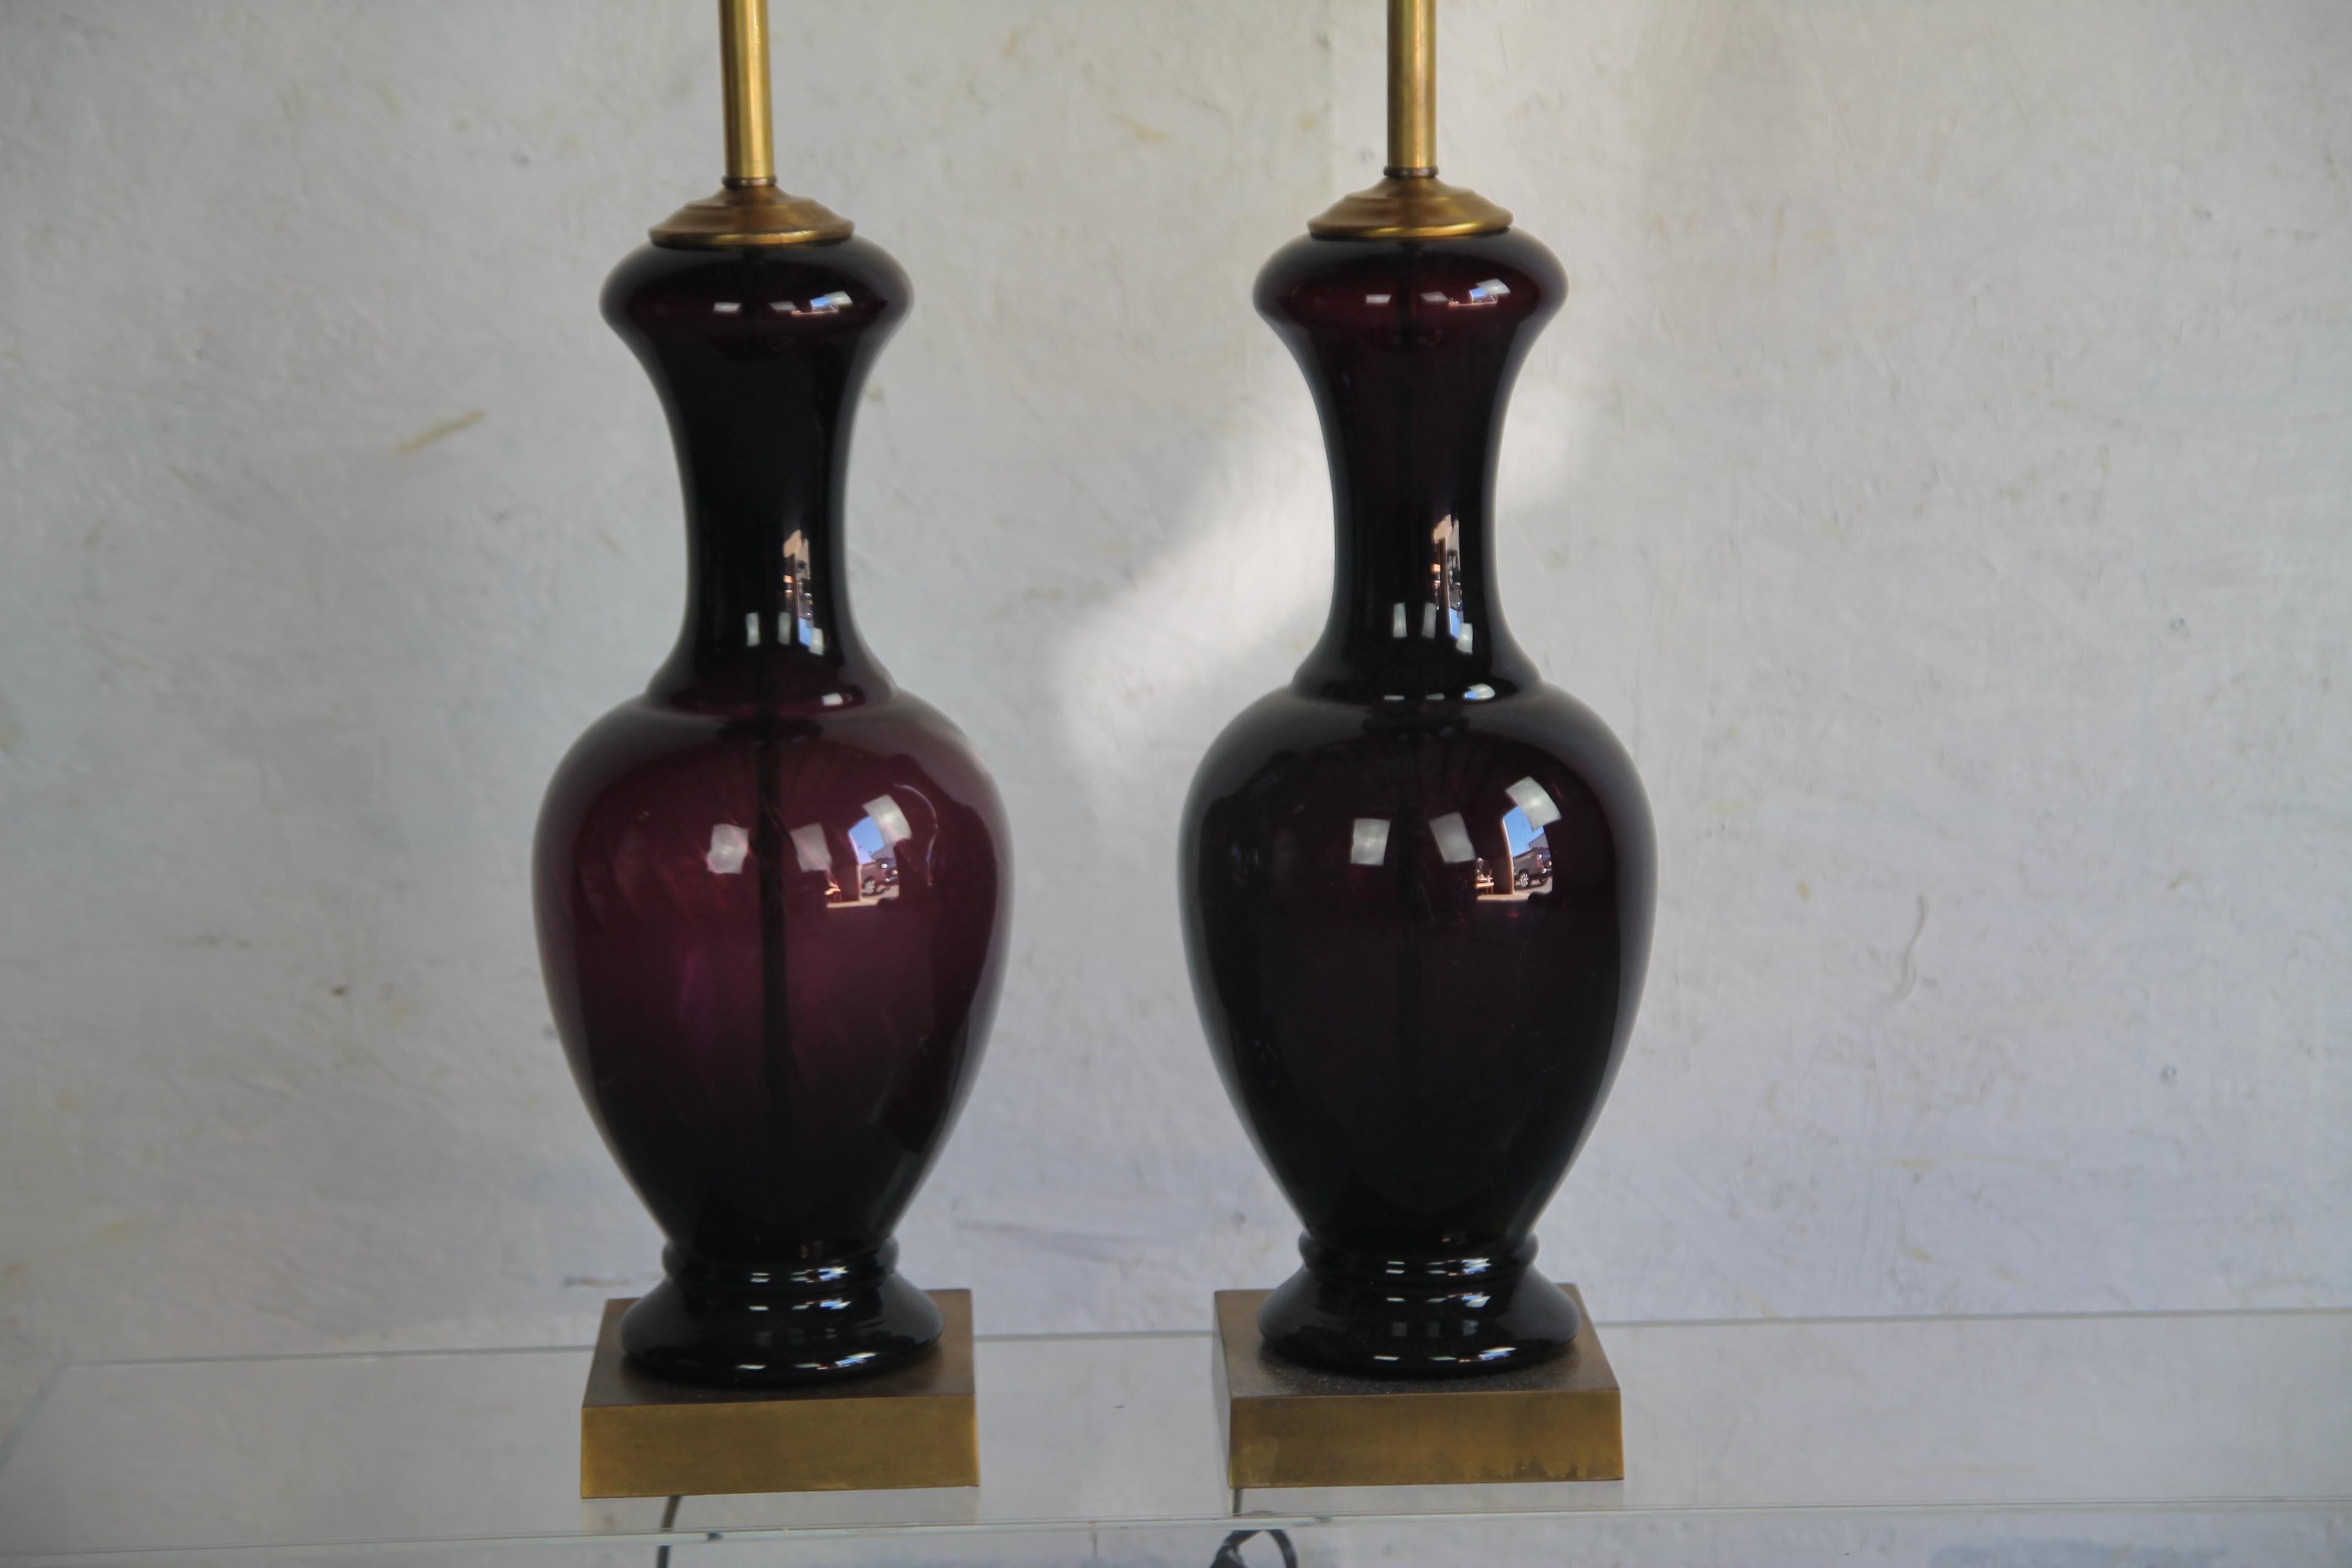 Old new stock Murano glass table lamps. Newly rewired. Wonderful deep purple color.